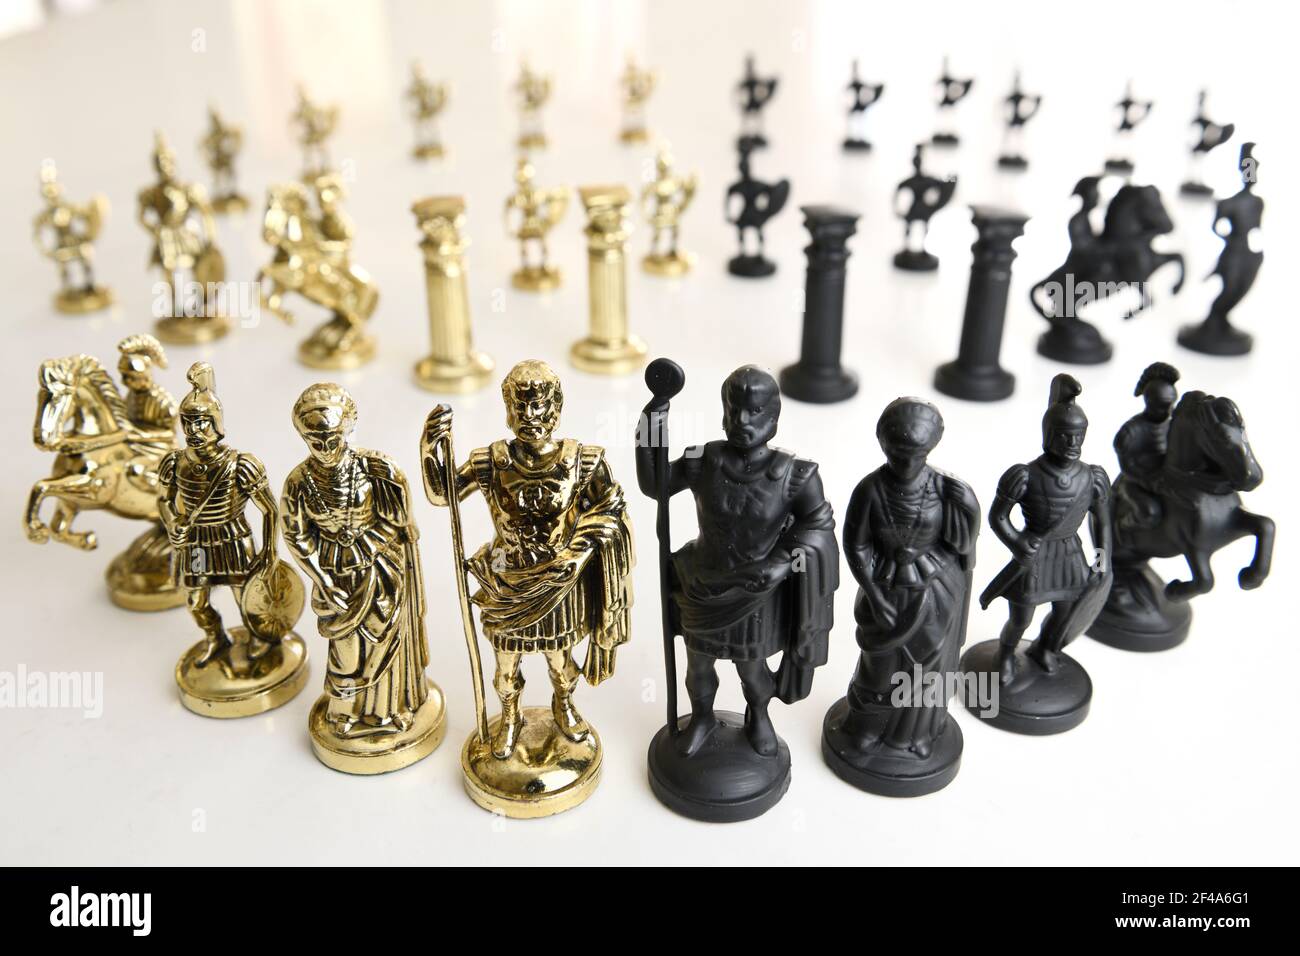 Black and gold opposing armies of metal figurine chess pieces on white background Stock Photo